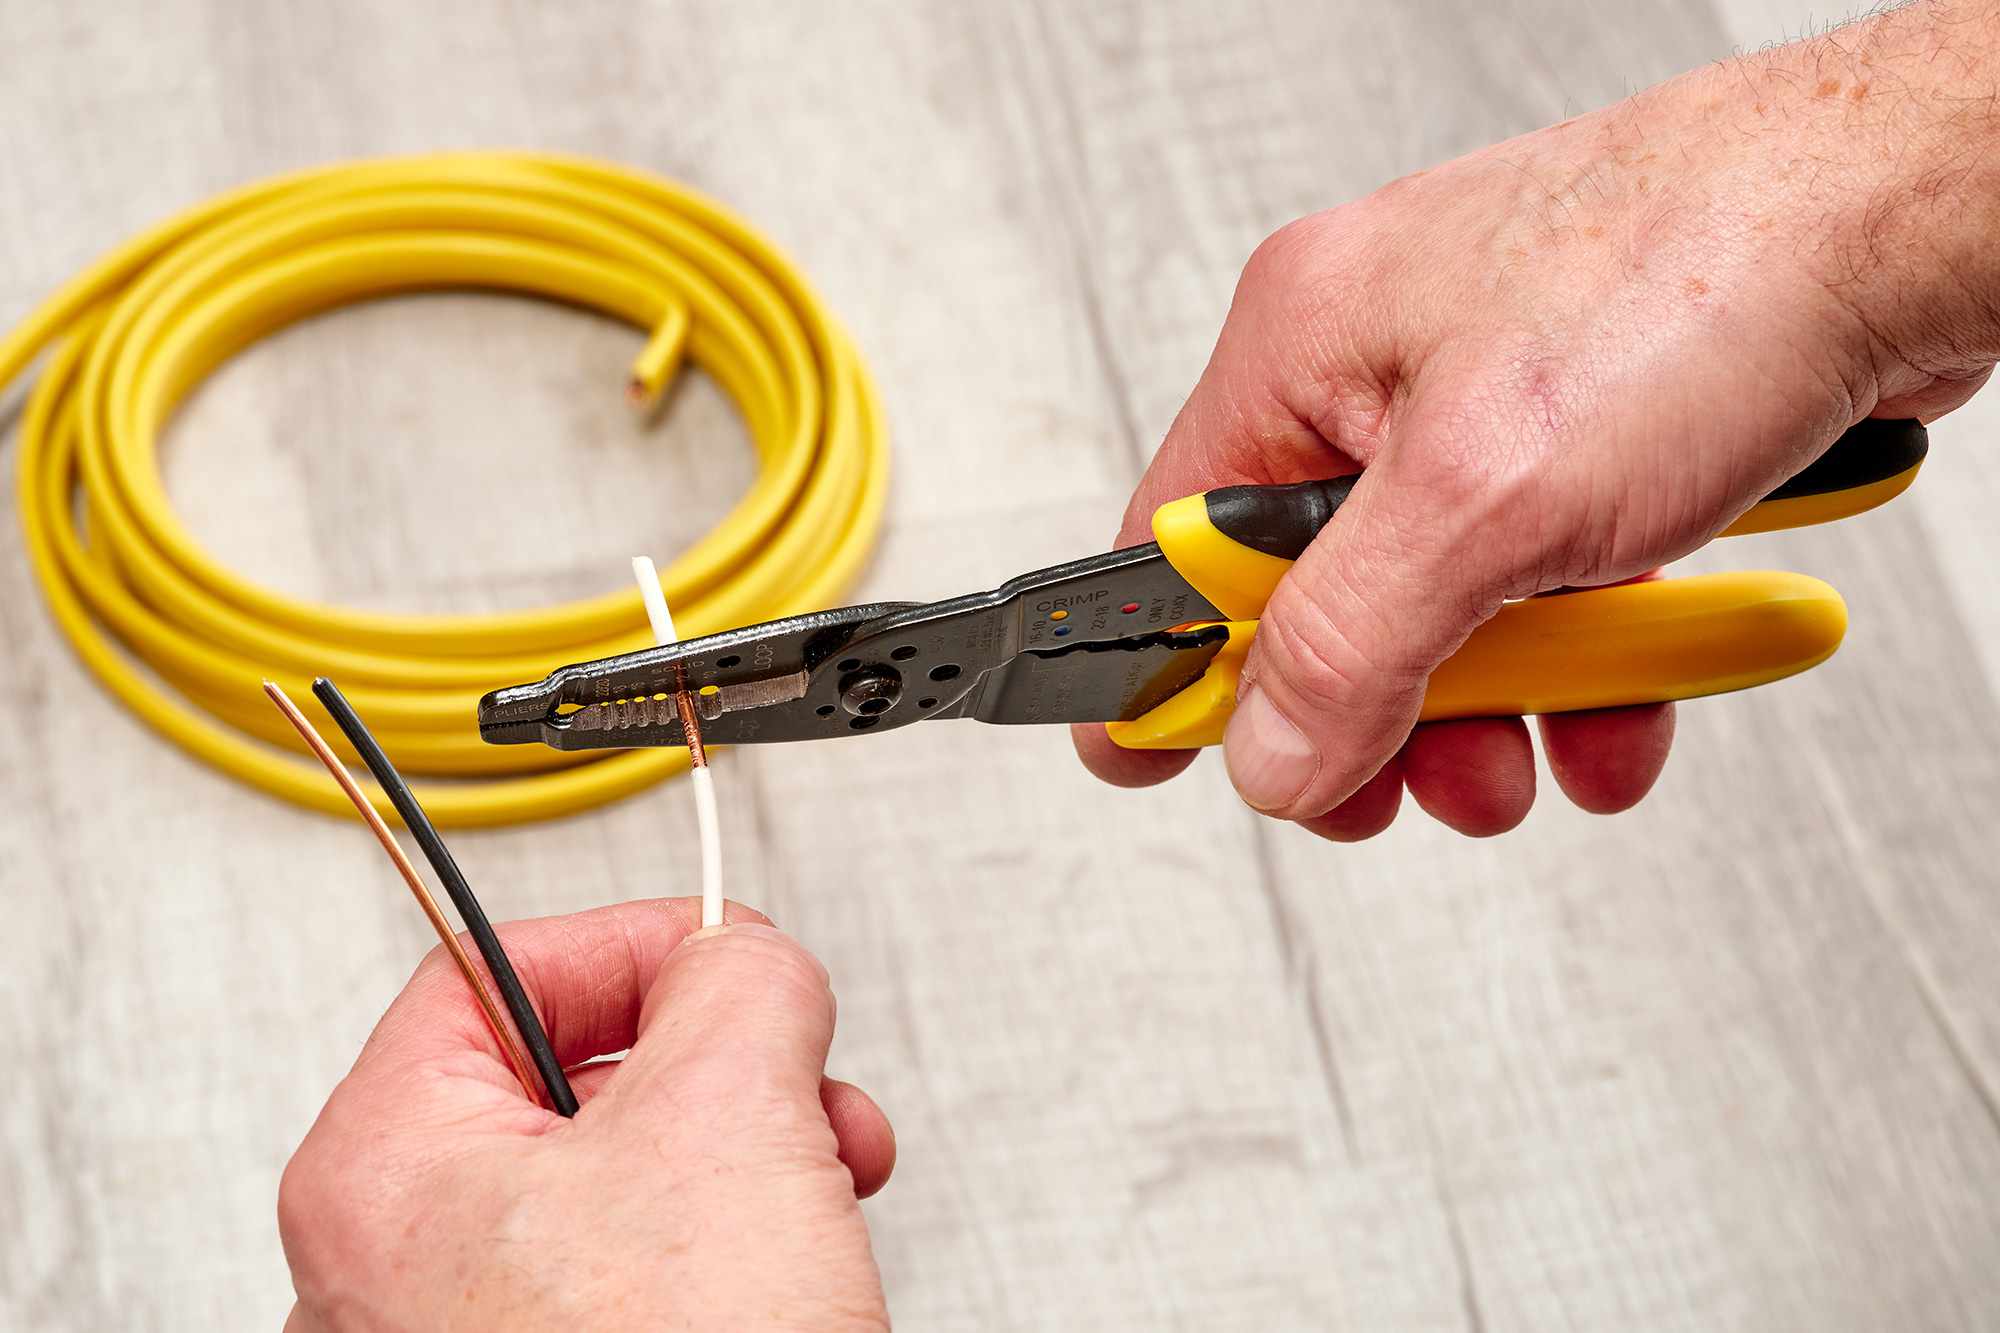 Best Pliers for Electricians: Why Klein Tools Makes the Sturdiest Sets